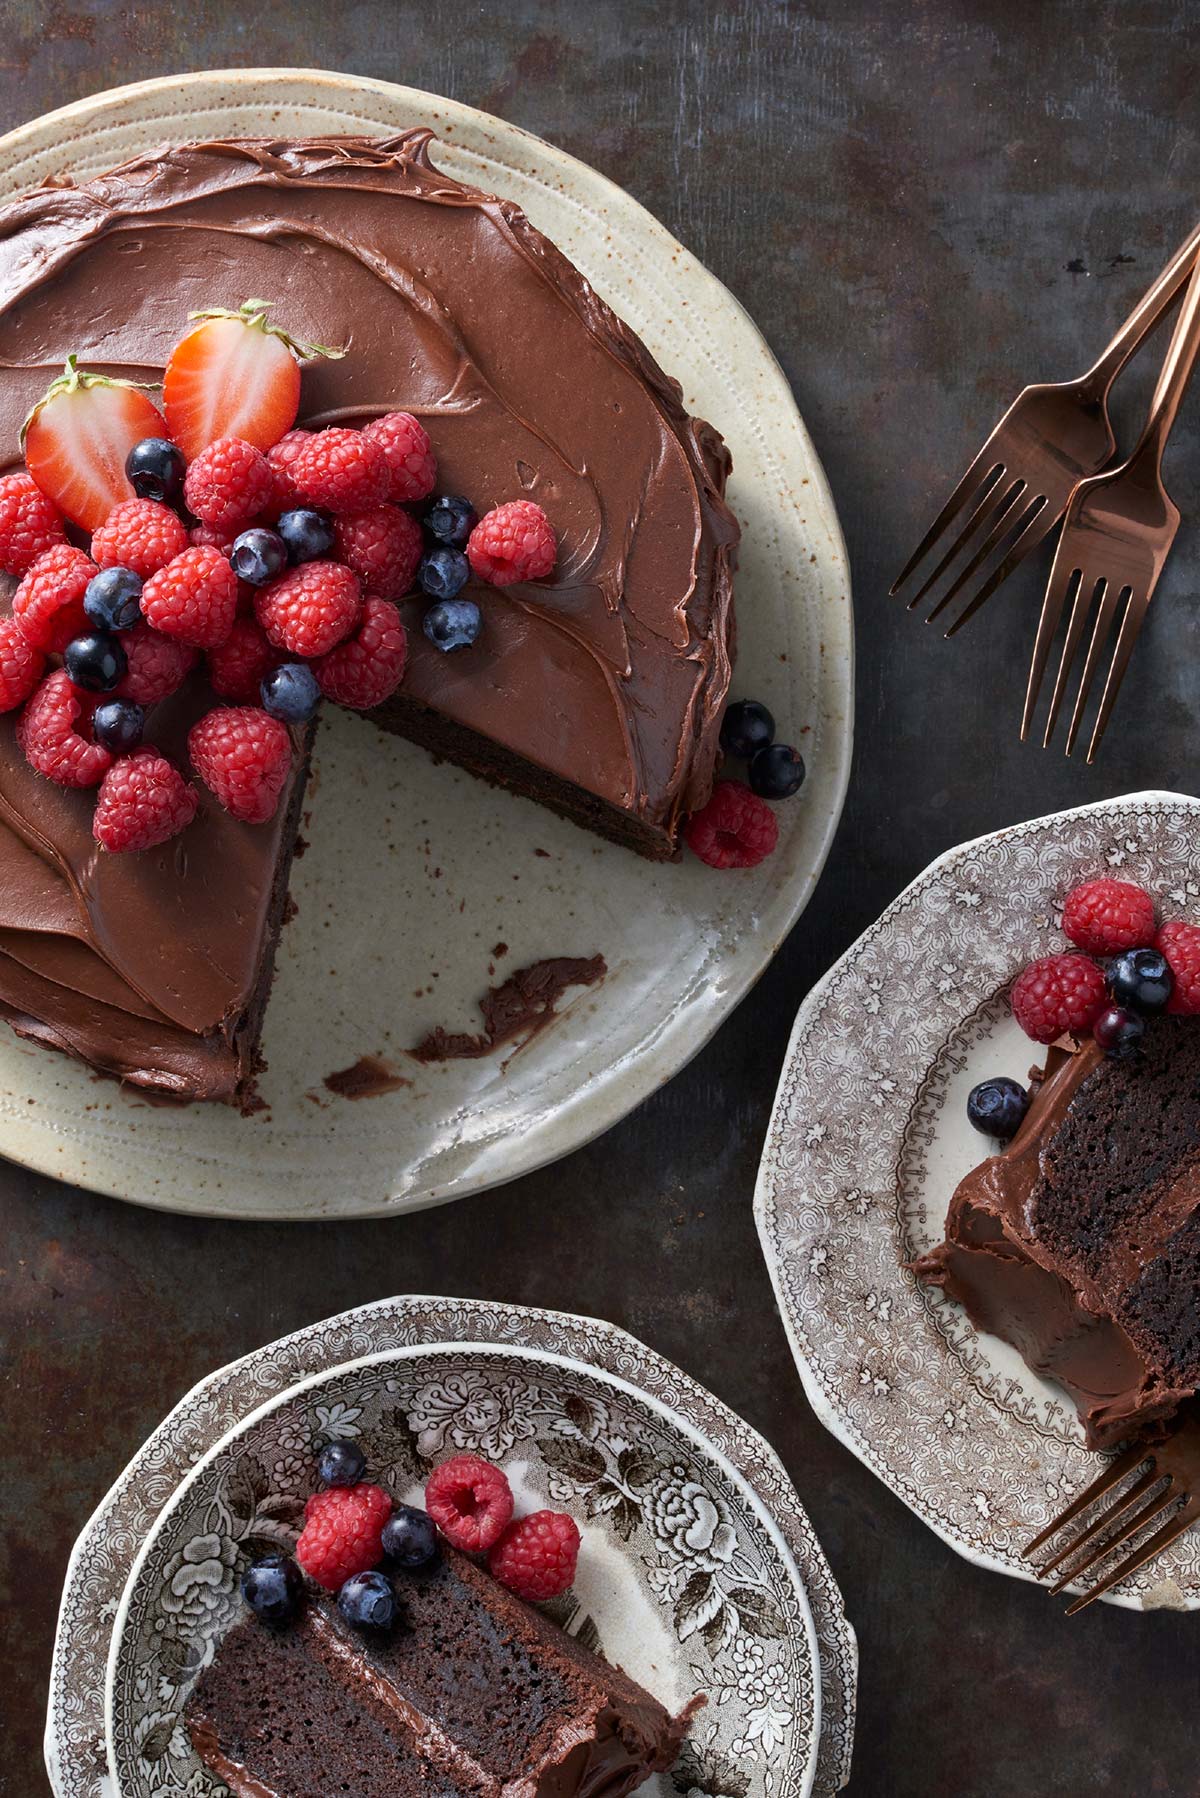 A gluten-free chocolate cake topped with chocolate frosting and fresh fruit with a few slices on plates